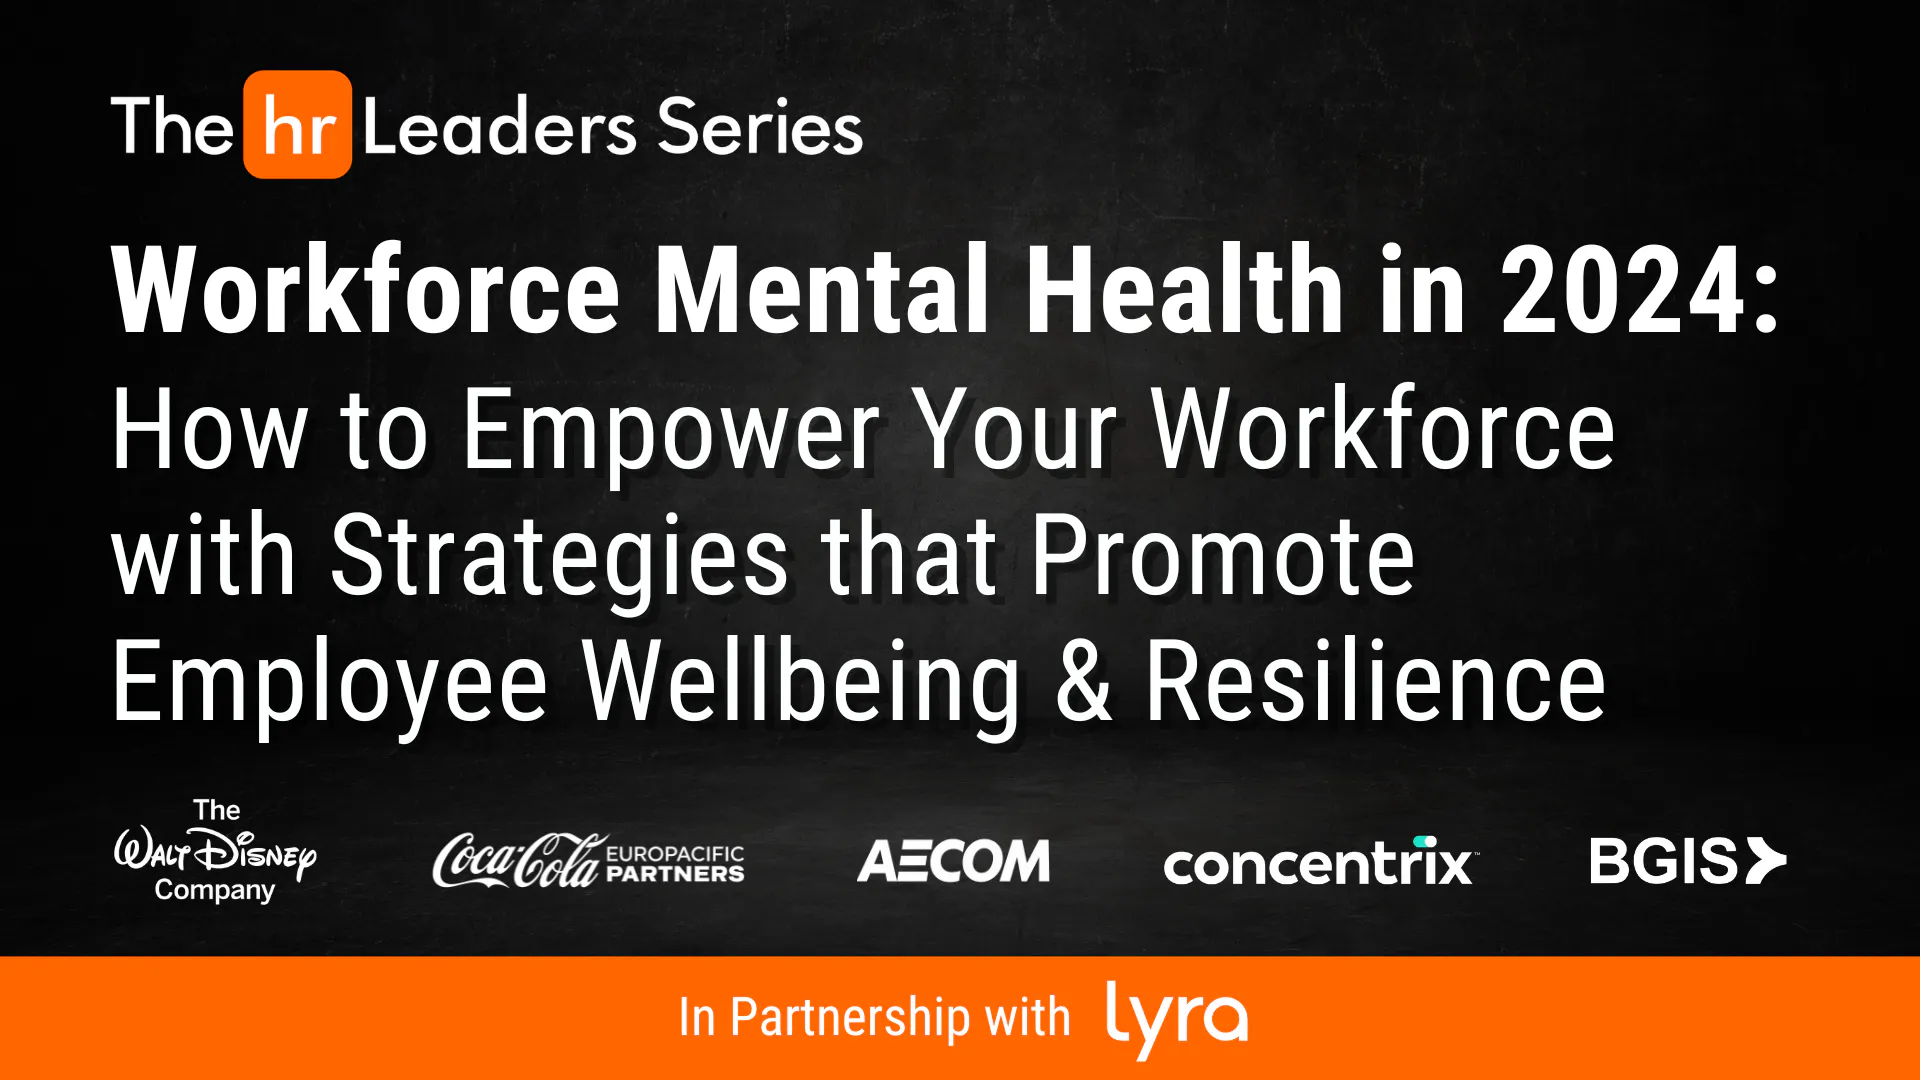 Workforce Mental Health in 2024: How to Empower Your Workforce with Strategies that Promote Employee Wellbeing & Resilience event cover photo